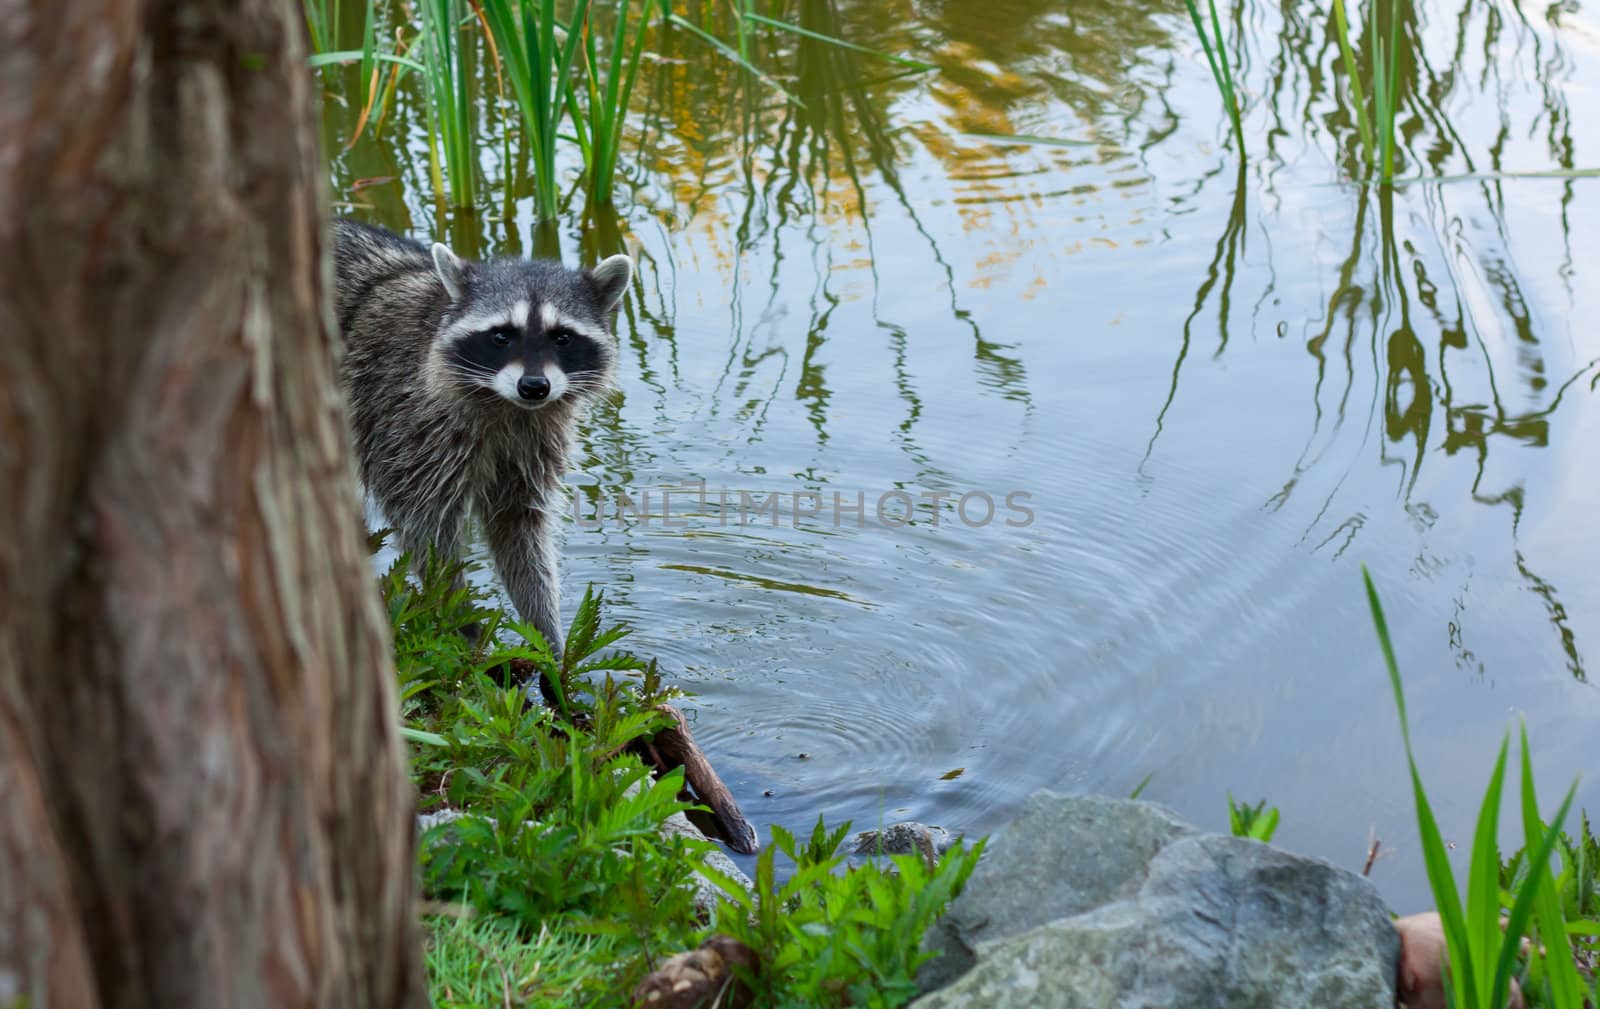 Racoon  in the brush on the lake looking curiosuly at the camera